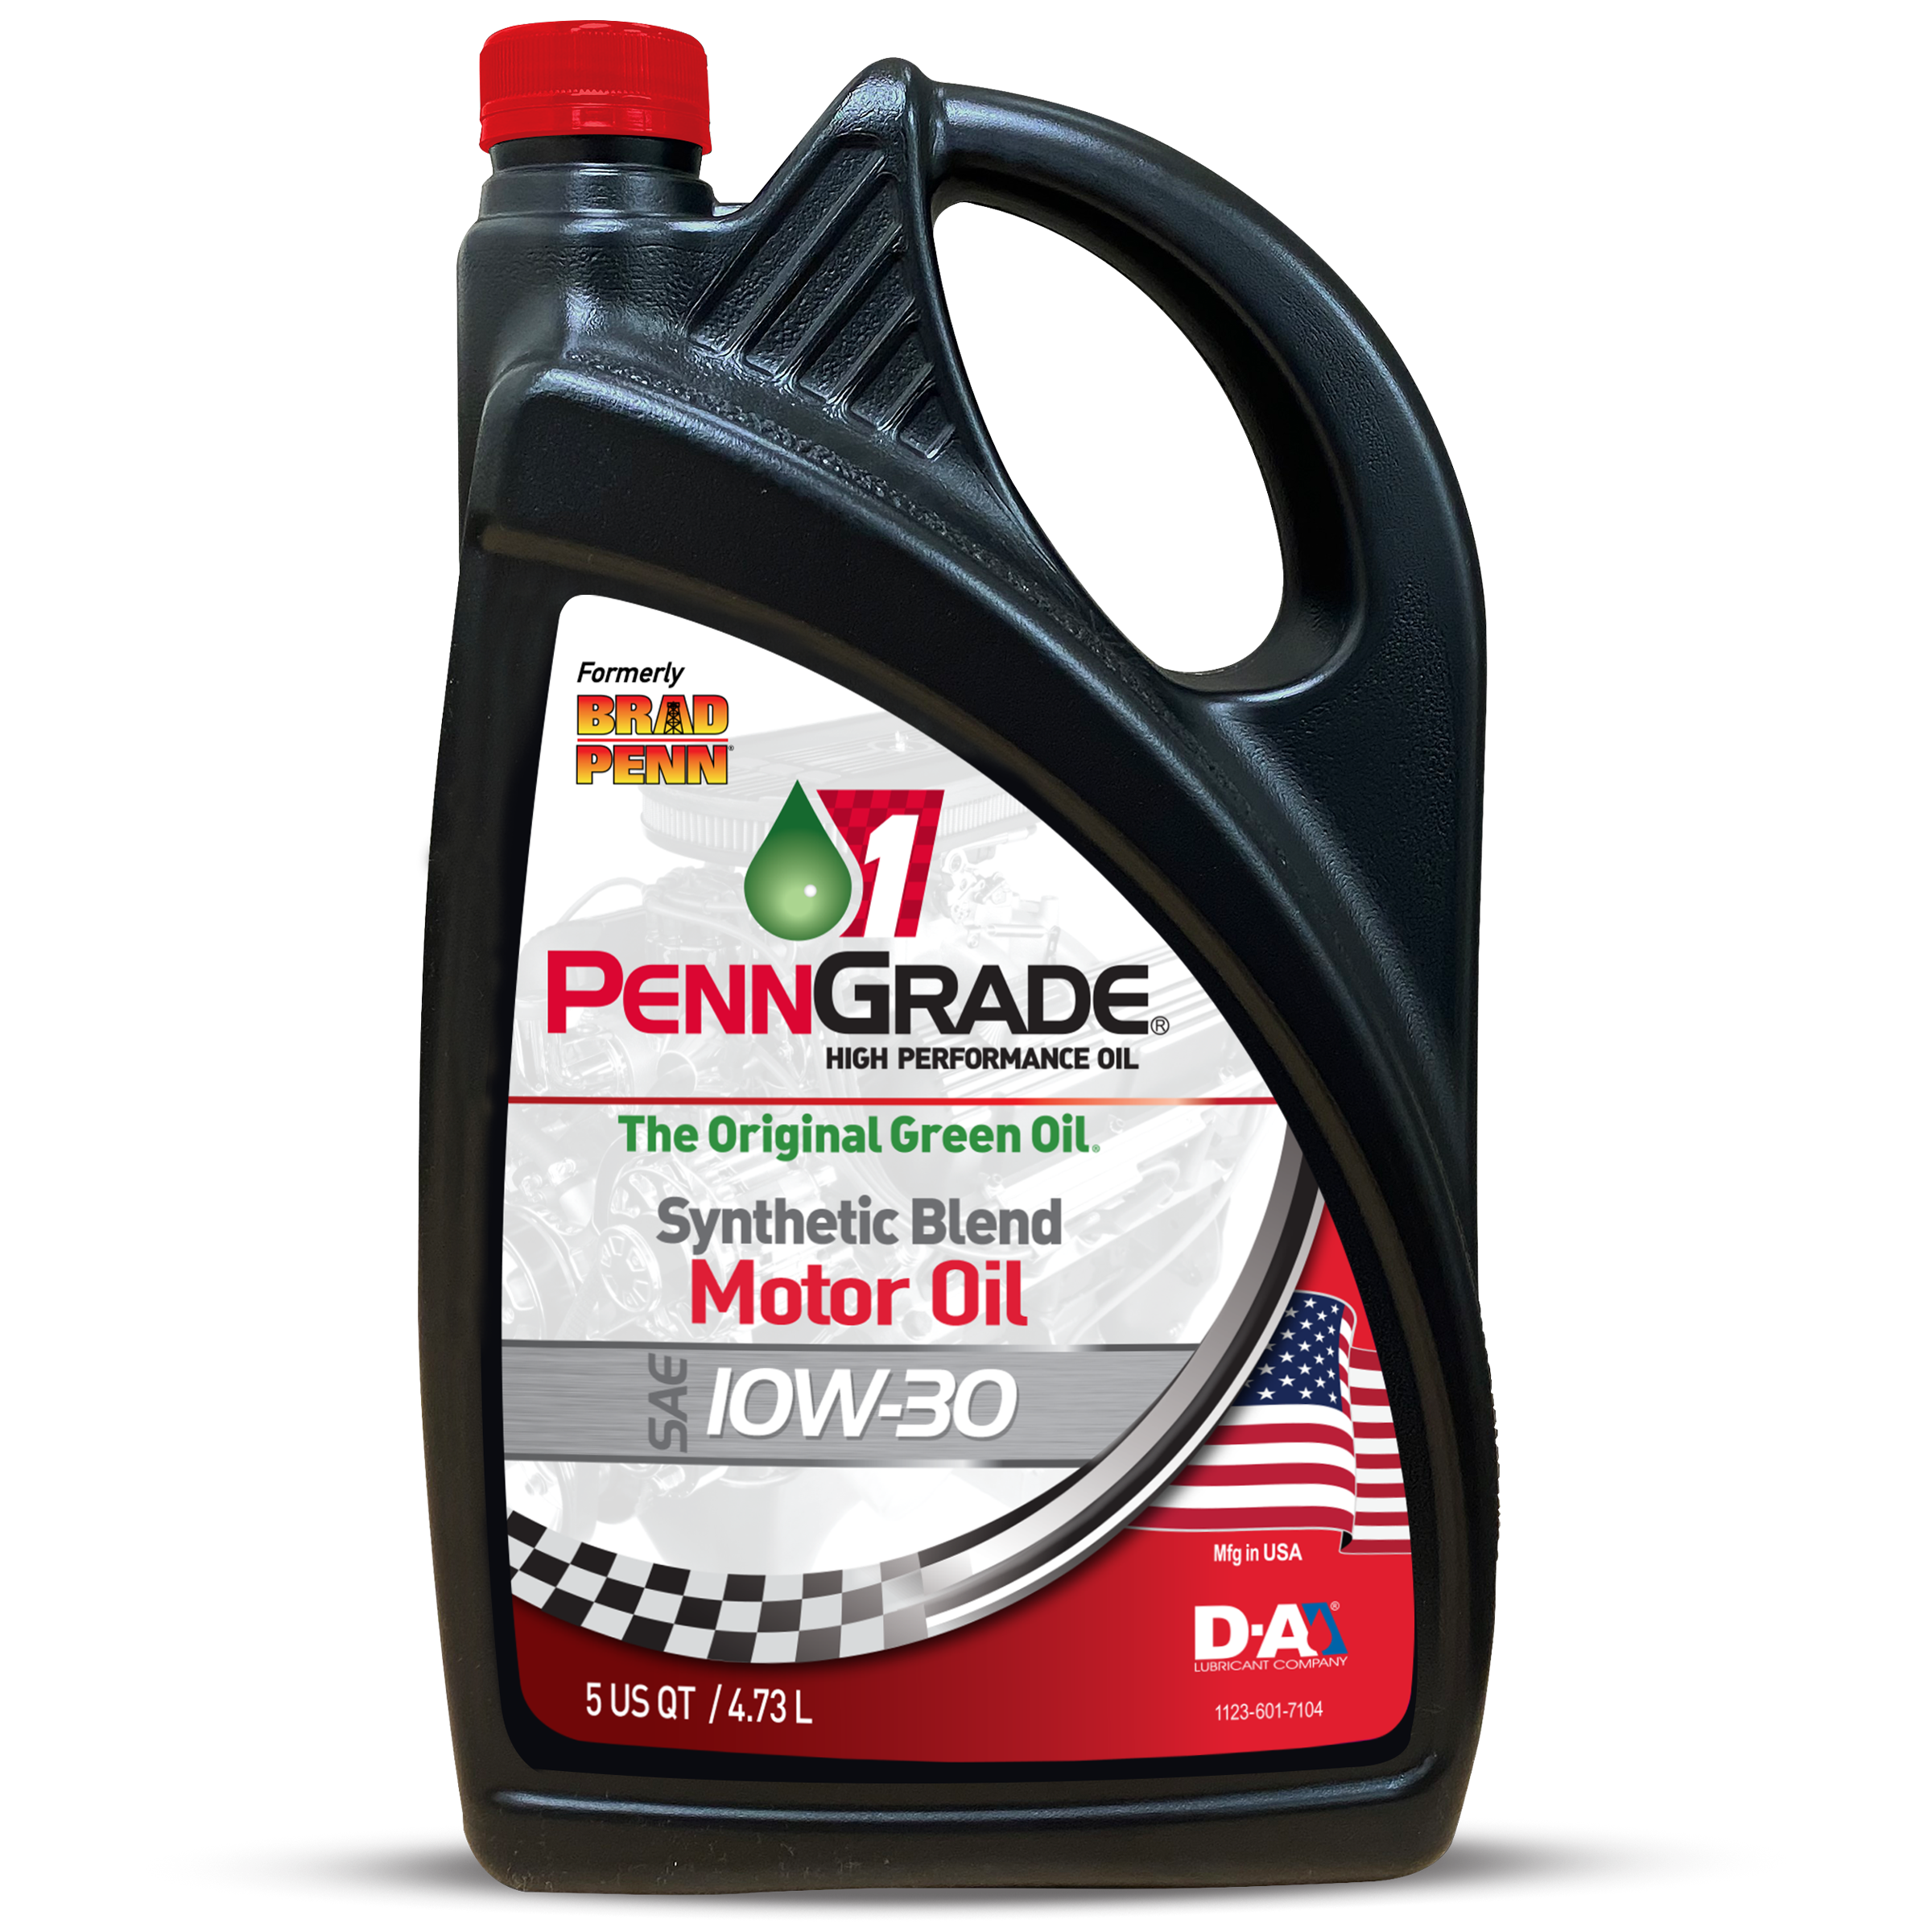 PENNGRADE 1® SYNTHETIC BLEND HIGH PERFORMANCE OIL SAE 20W-50